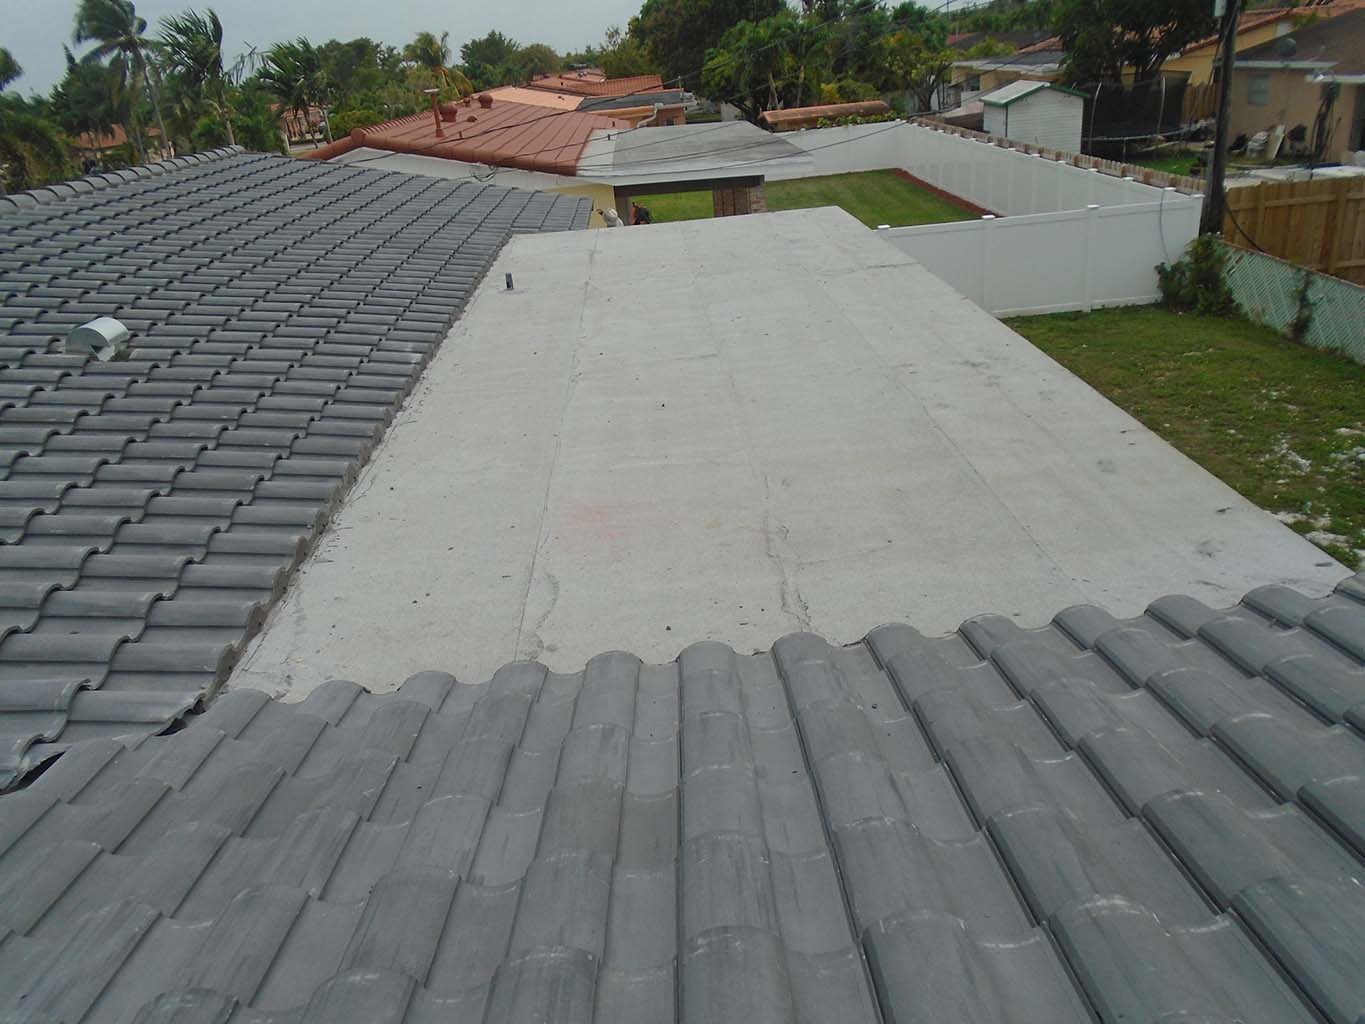 Installed "S" Concrete Roof Tile and Flat Roof